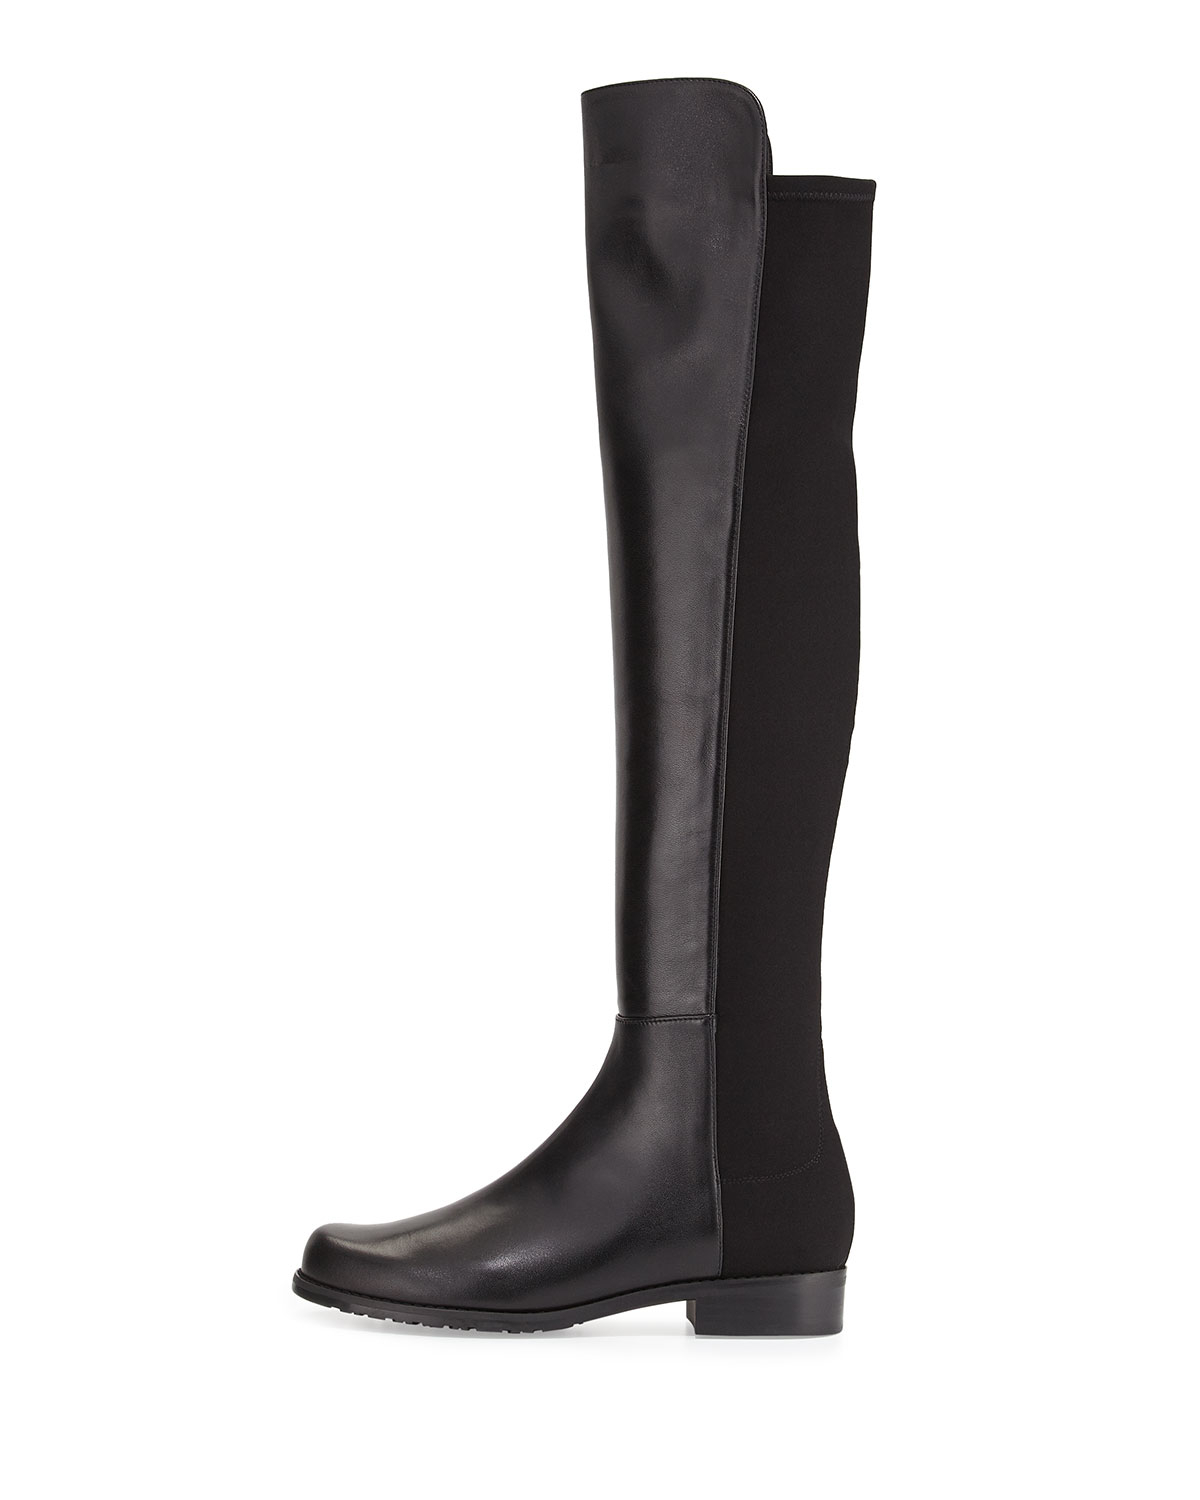 Lyst - Stuart Weitzman 50/50 Narrow Napa Stretch Over-the-knee Boot in ...